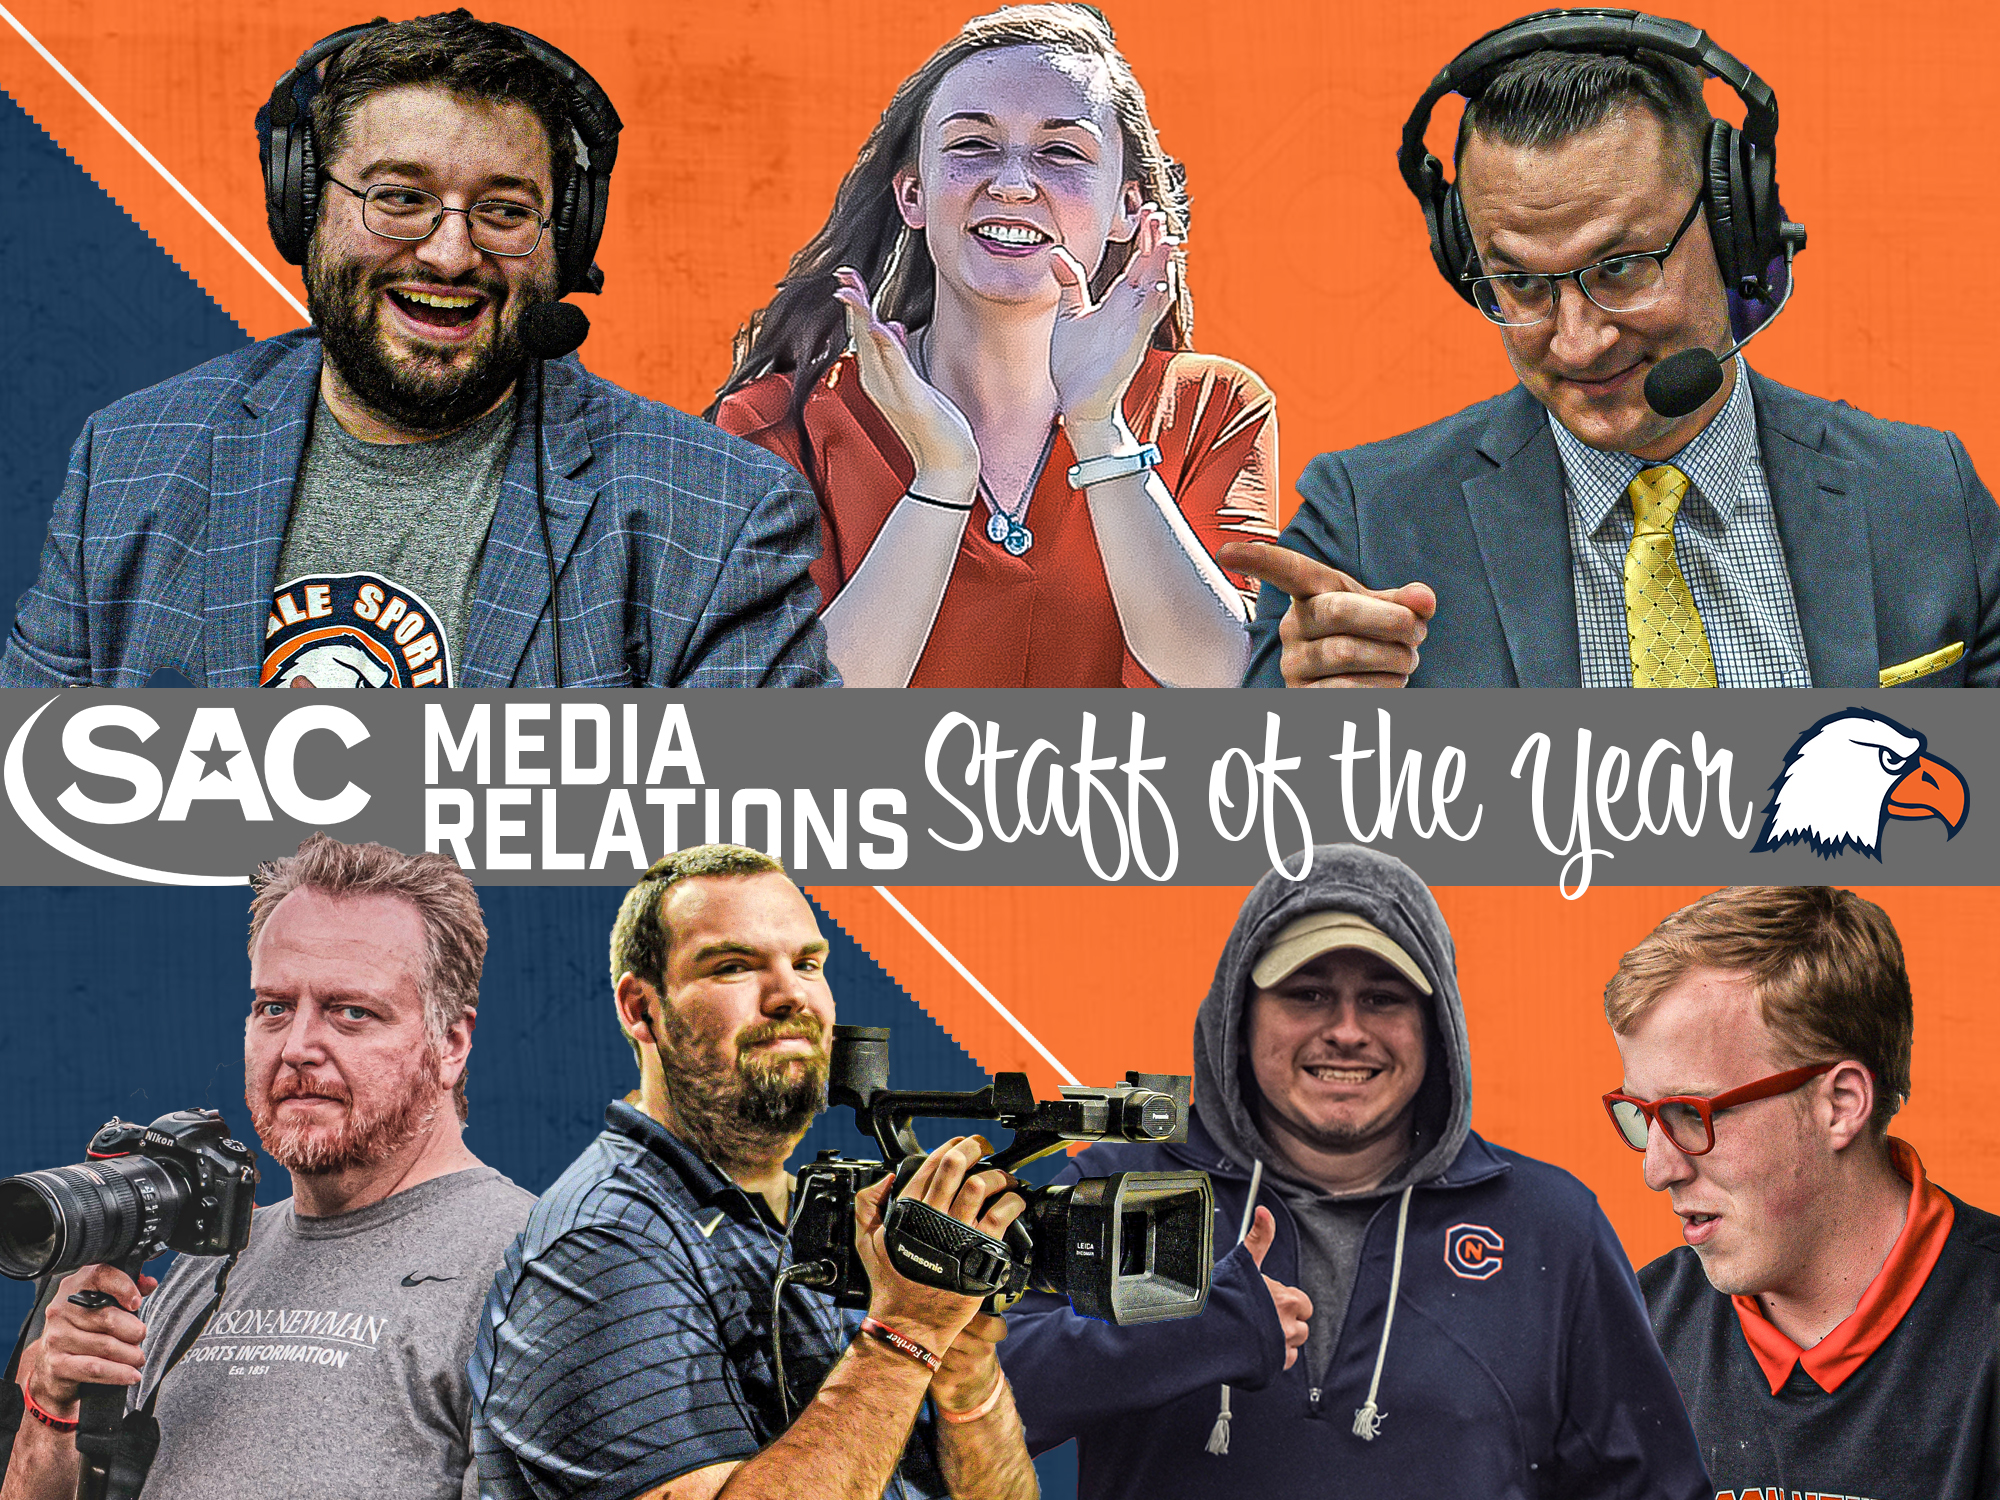 Carson-Newman named SAC Media Relations Staff of the Year